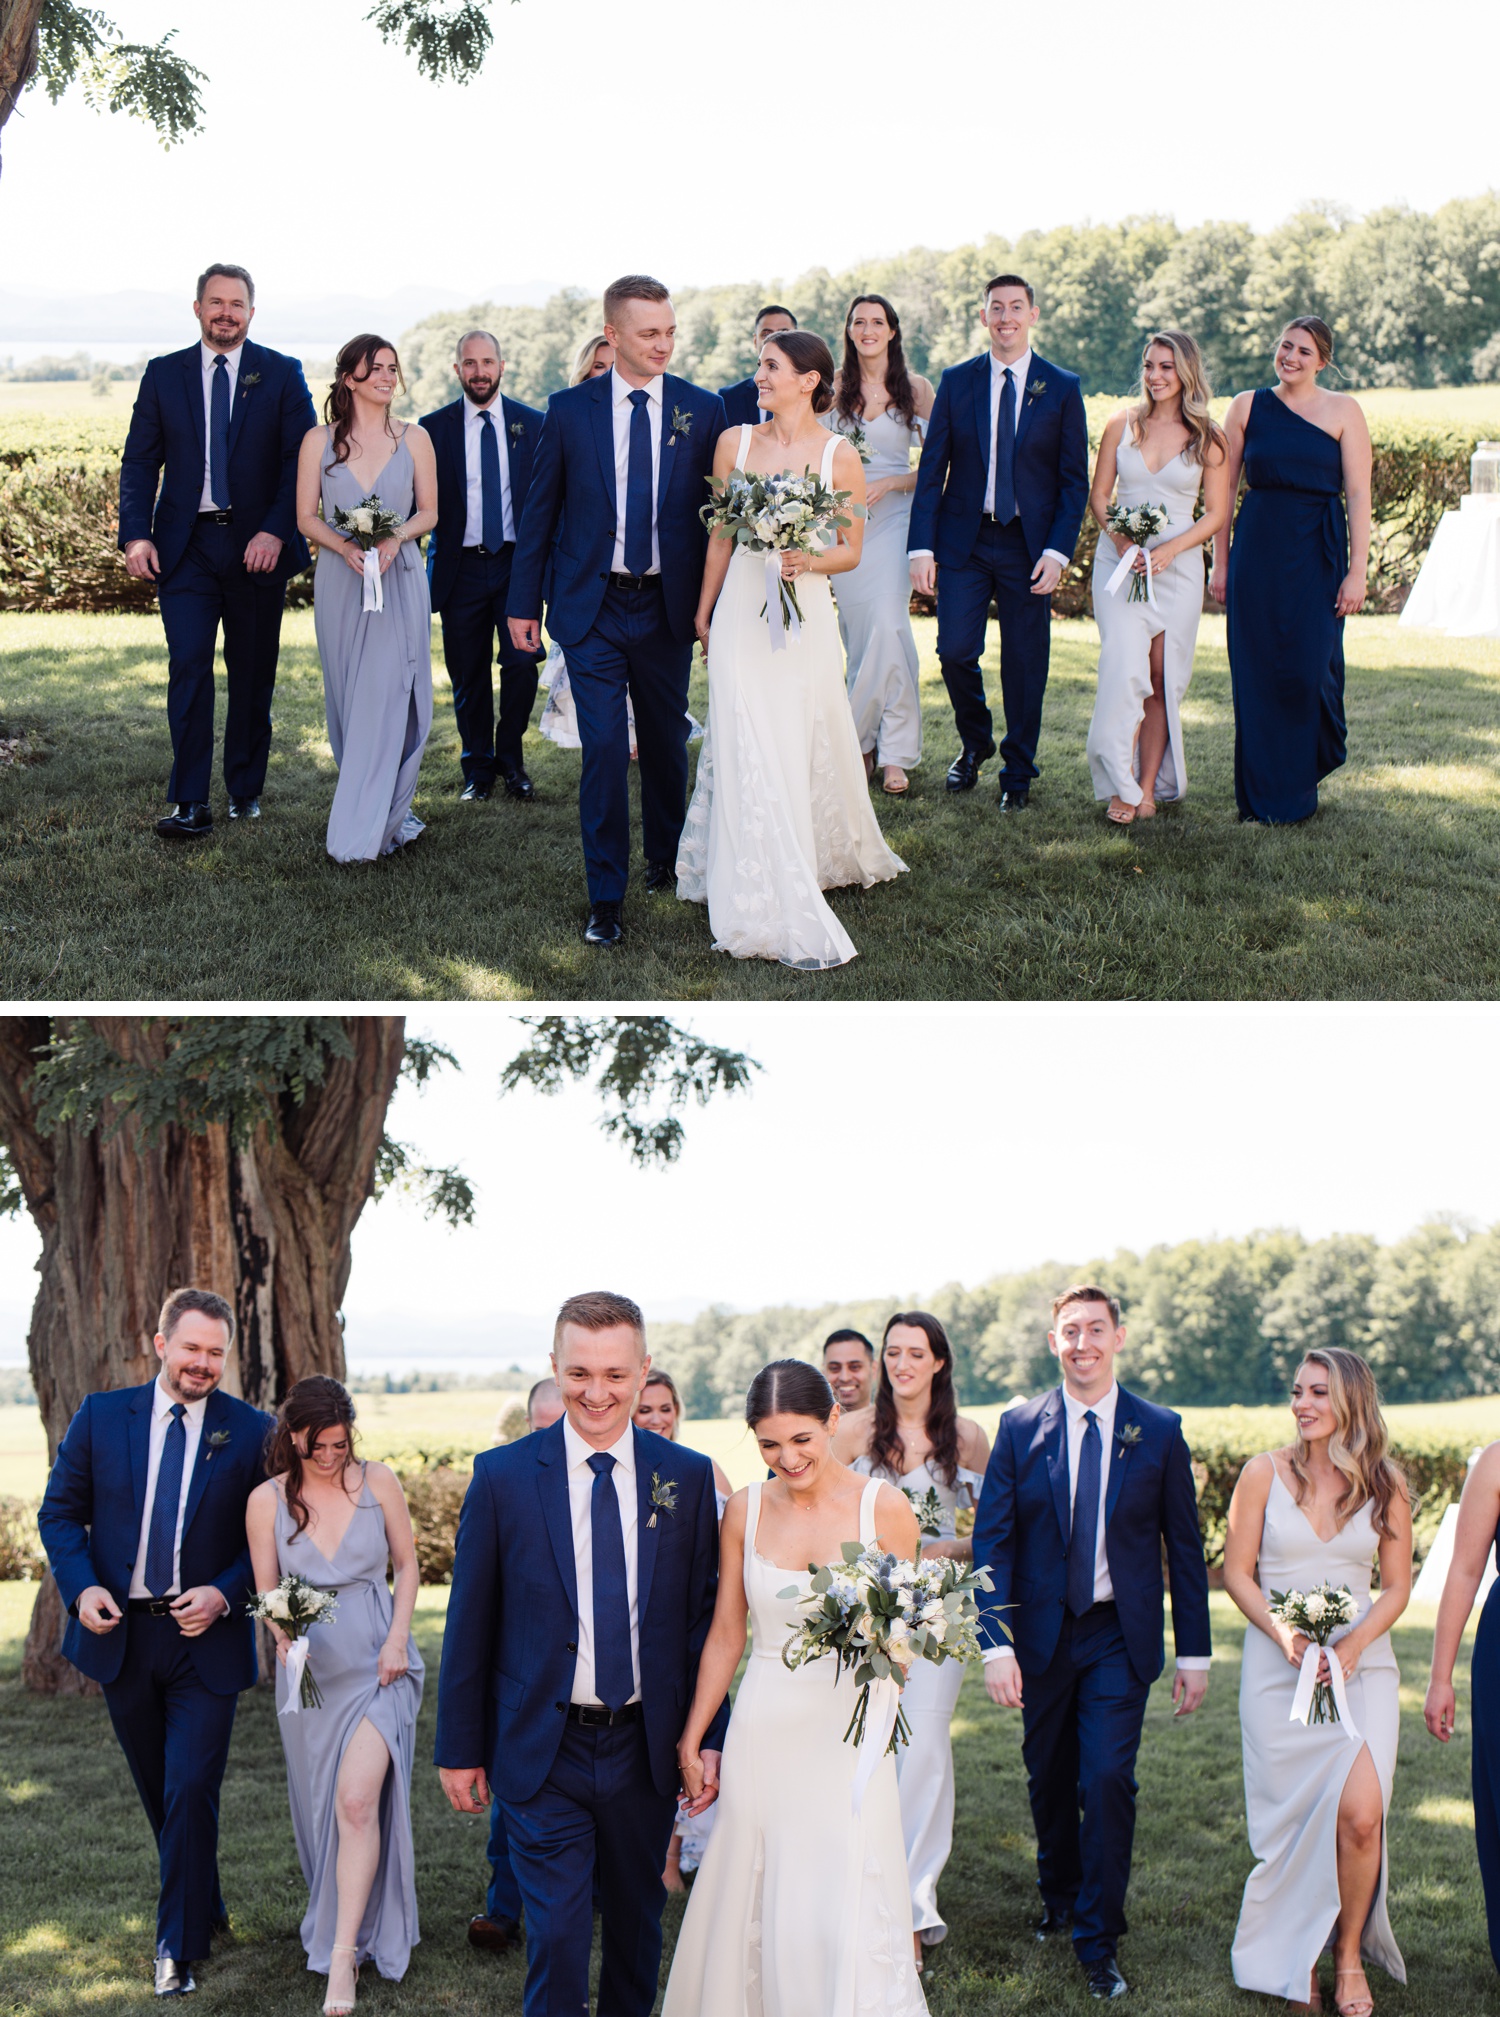 Bridal party portraits at The Brick House at Shelburne Museum